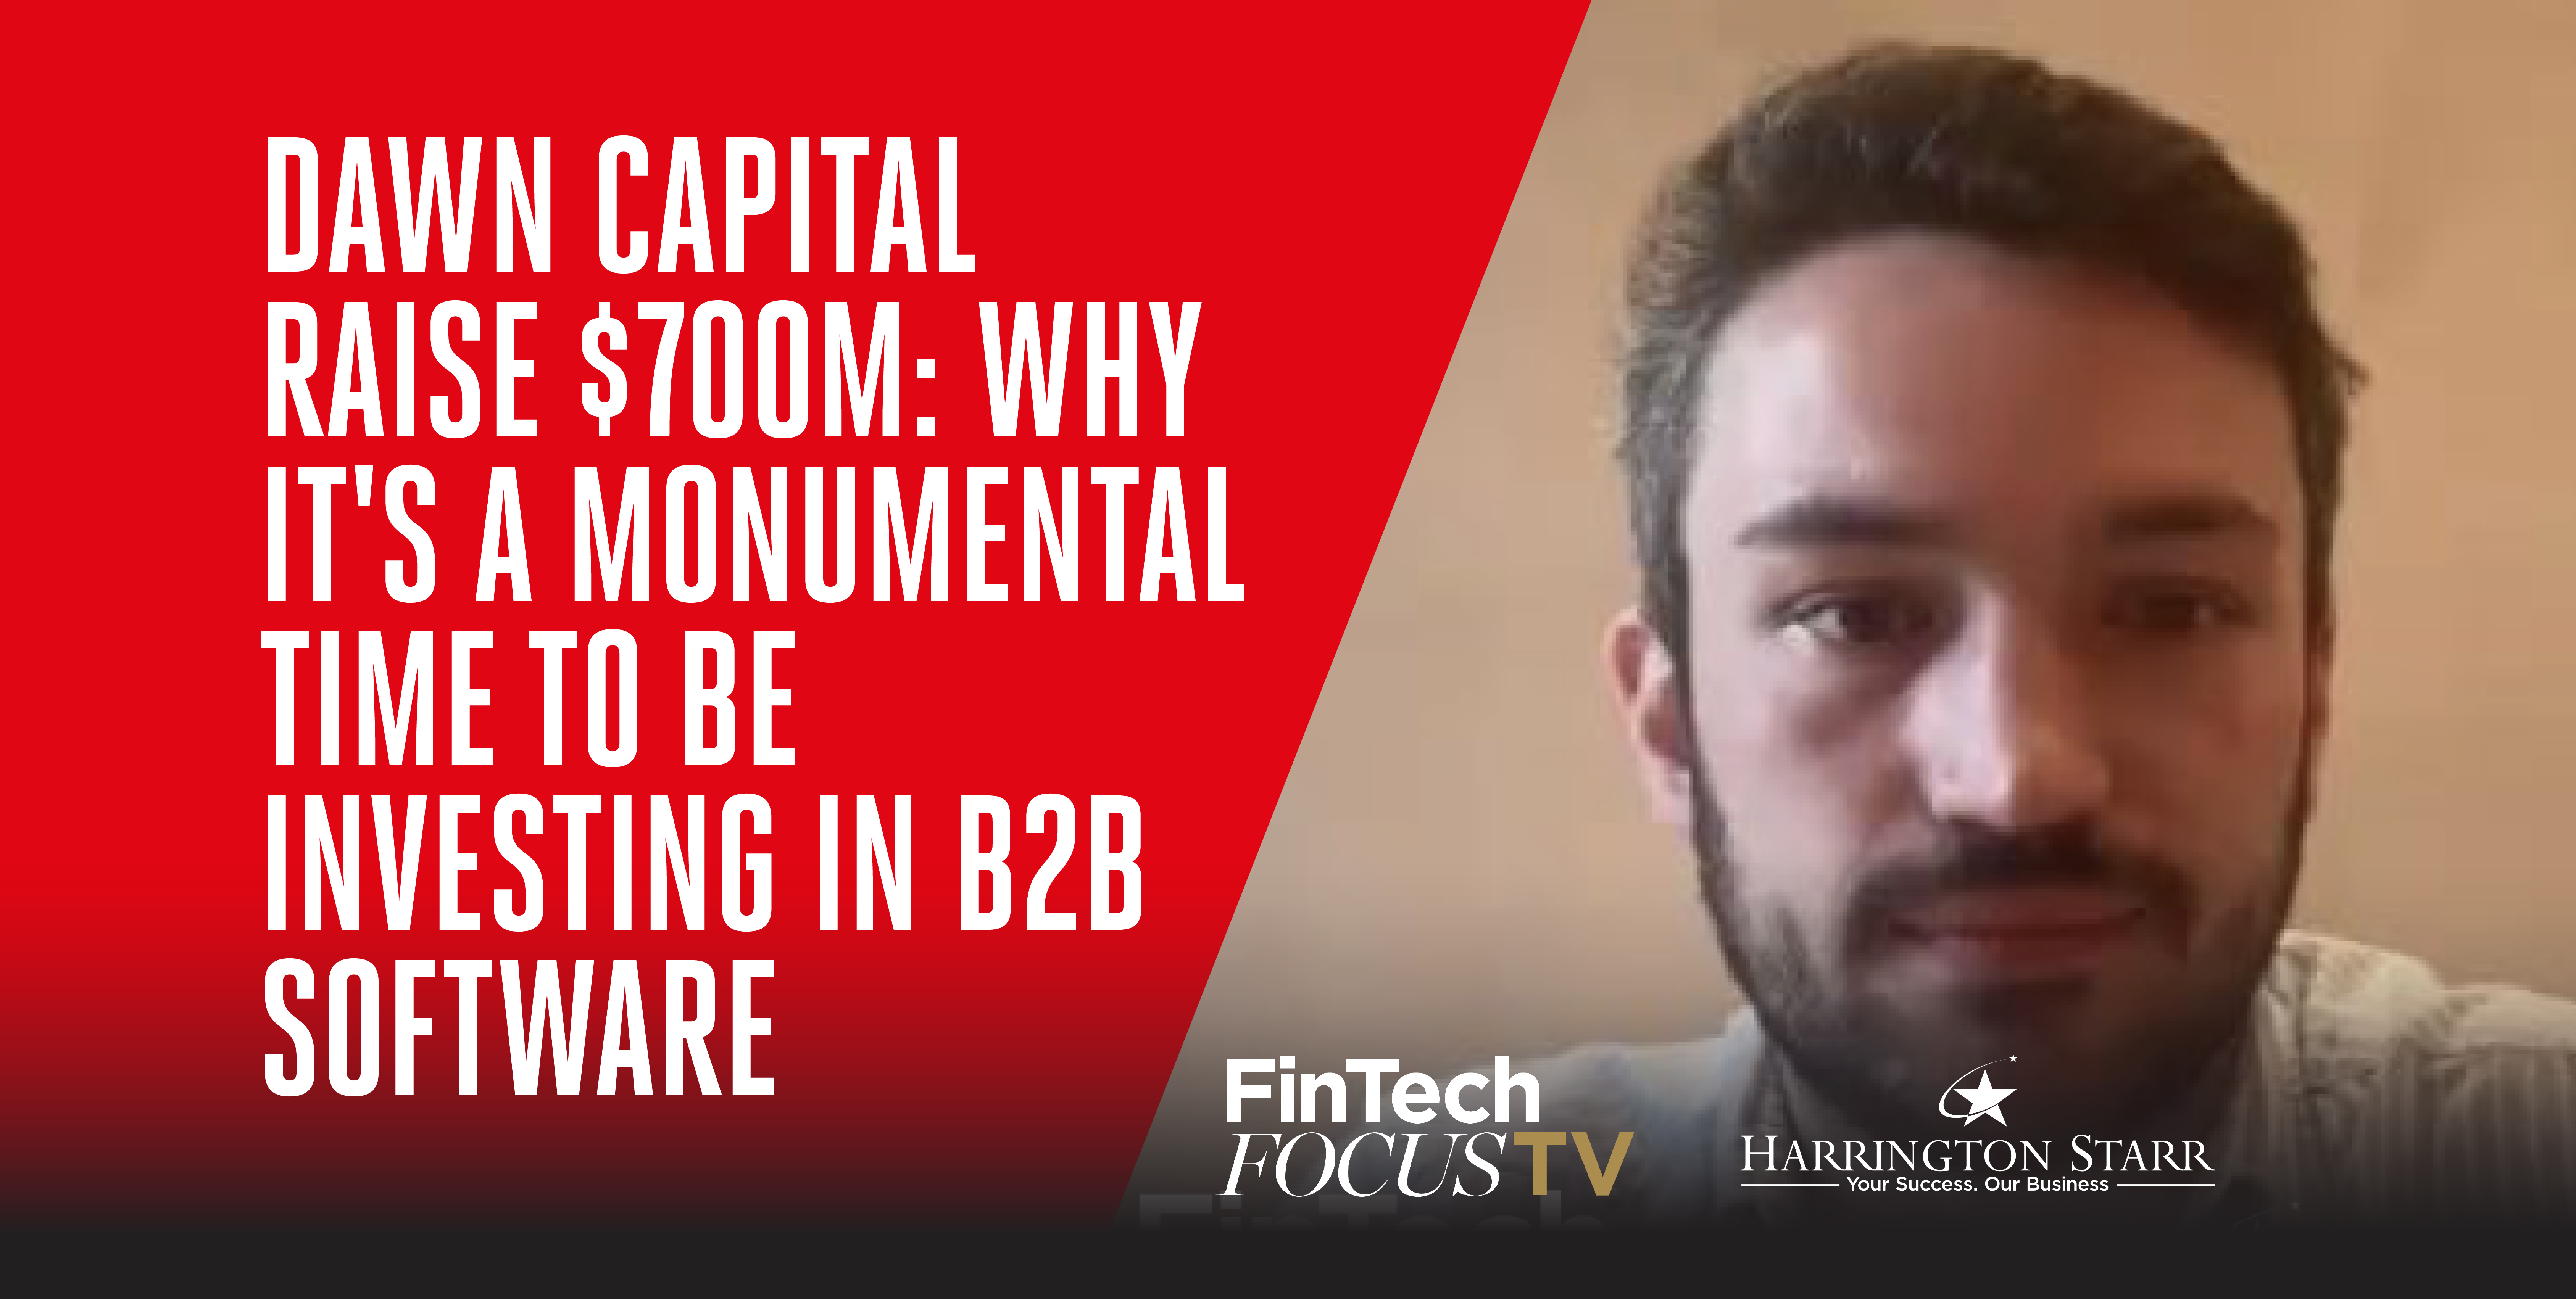 Dawn Capital Raise $700m: Why it's a monumental time to be investing in B2B Software